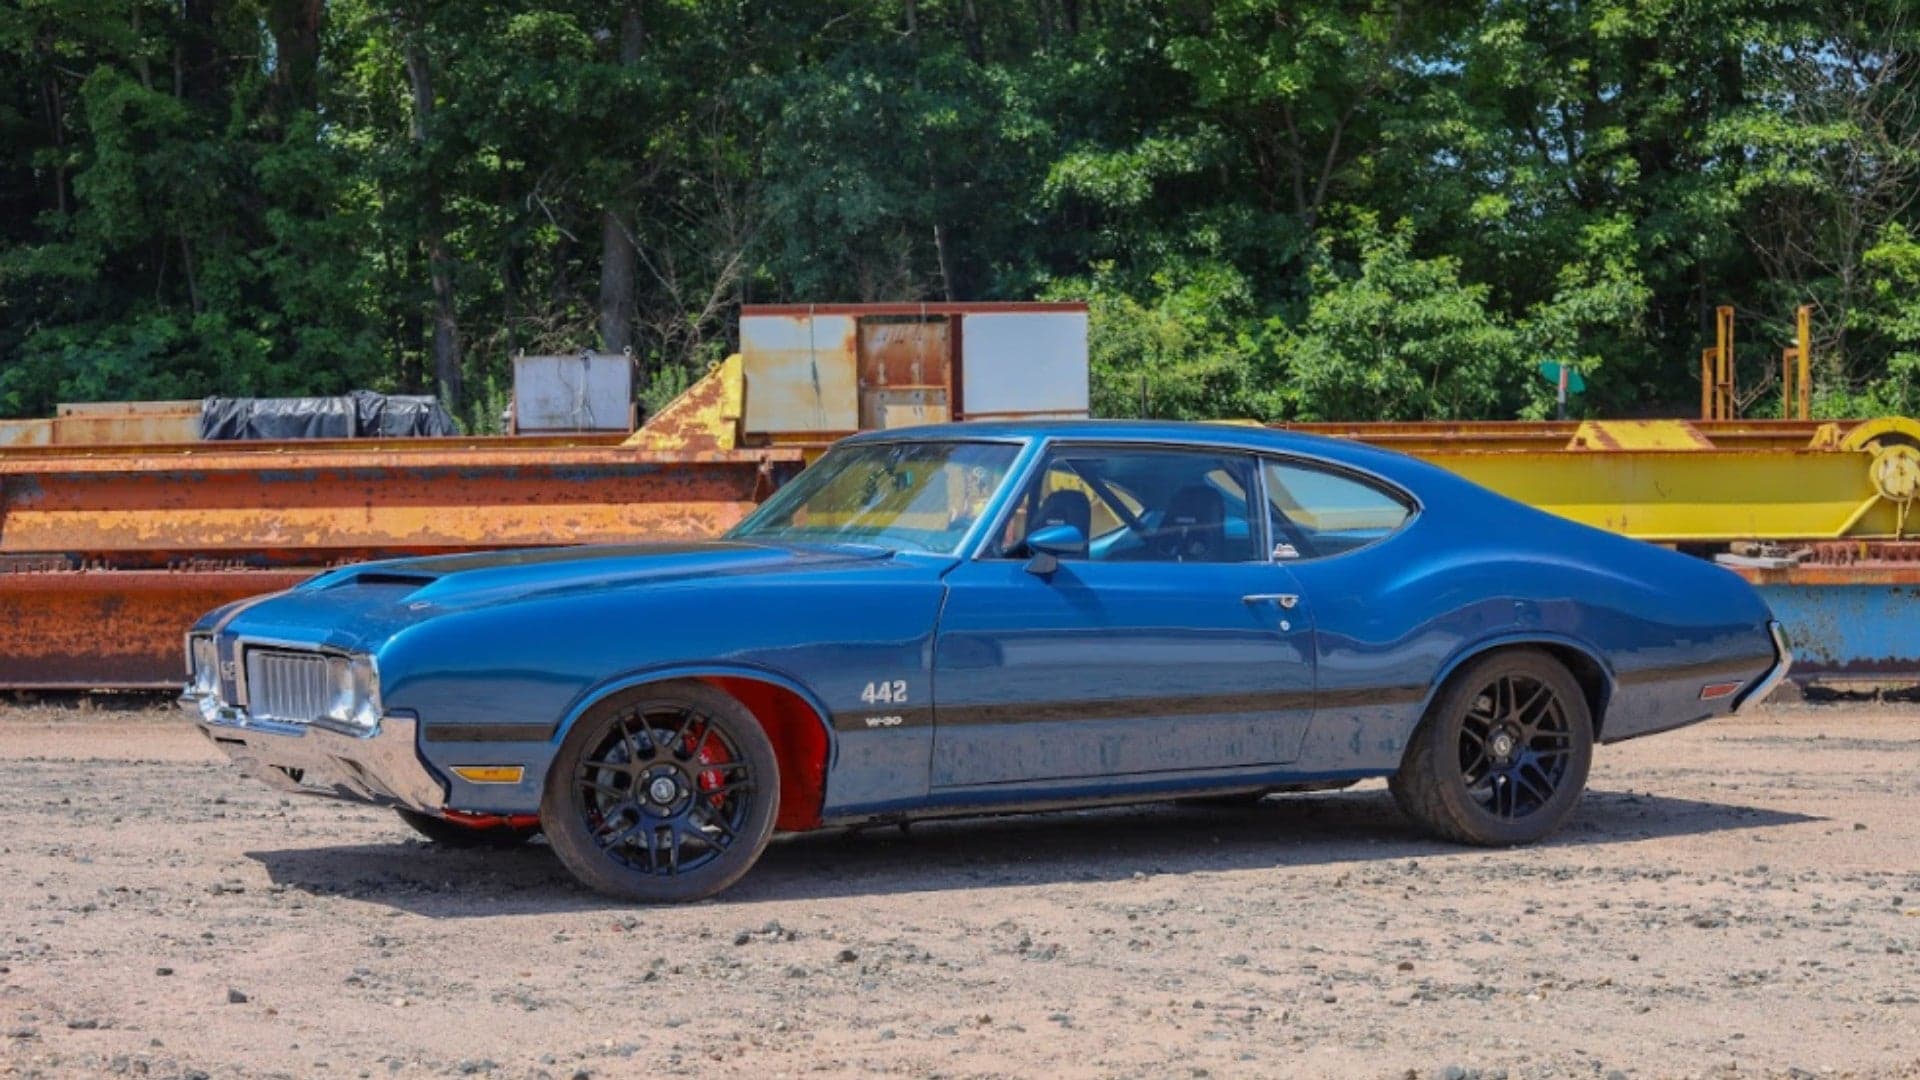 How This 1970 Oldsmobile Cutlass Went From a Christmas Wish to a 463-Cubic-Inch Pro-Tourer